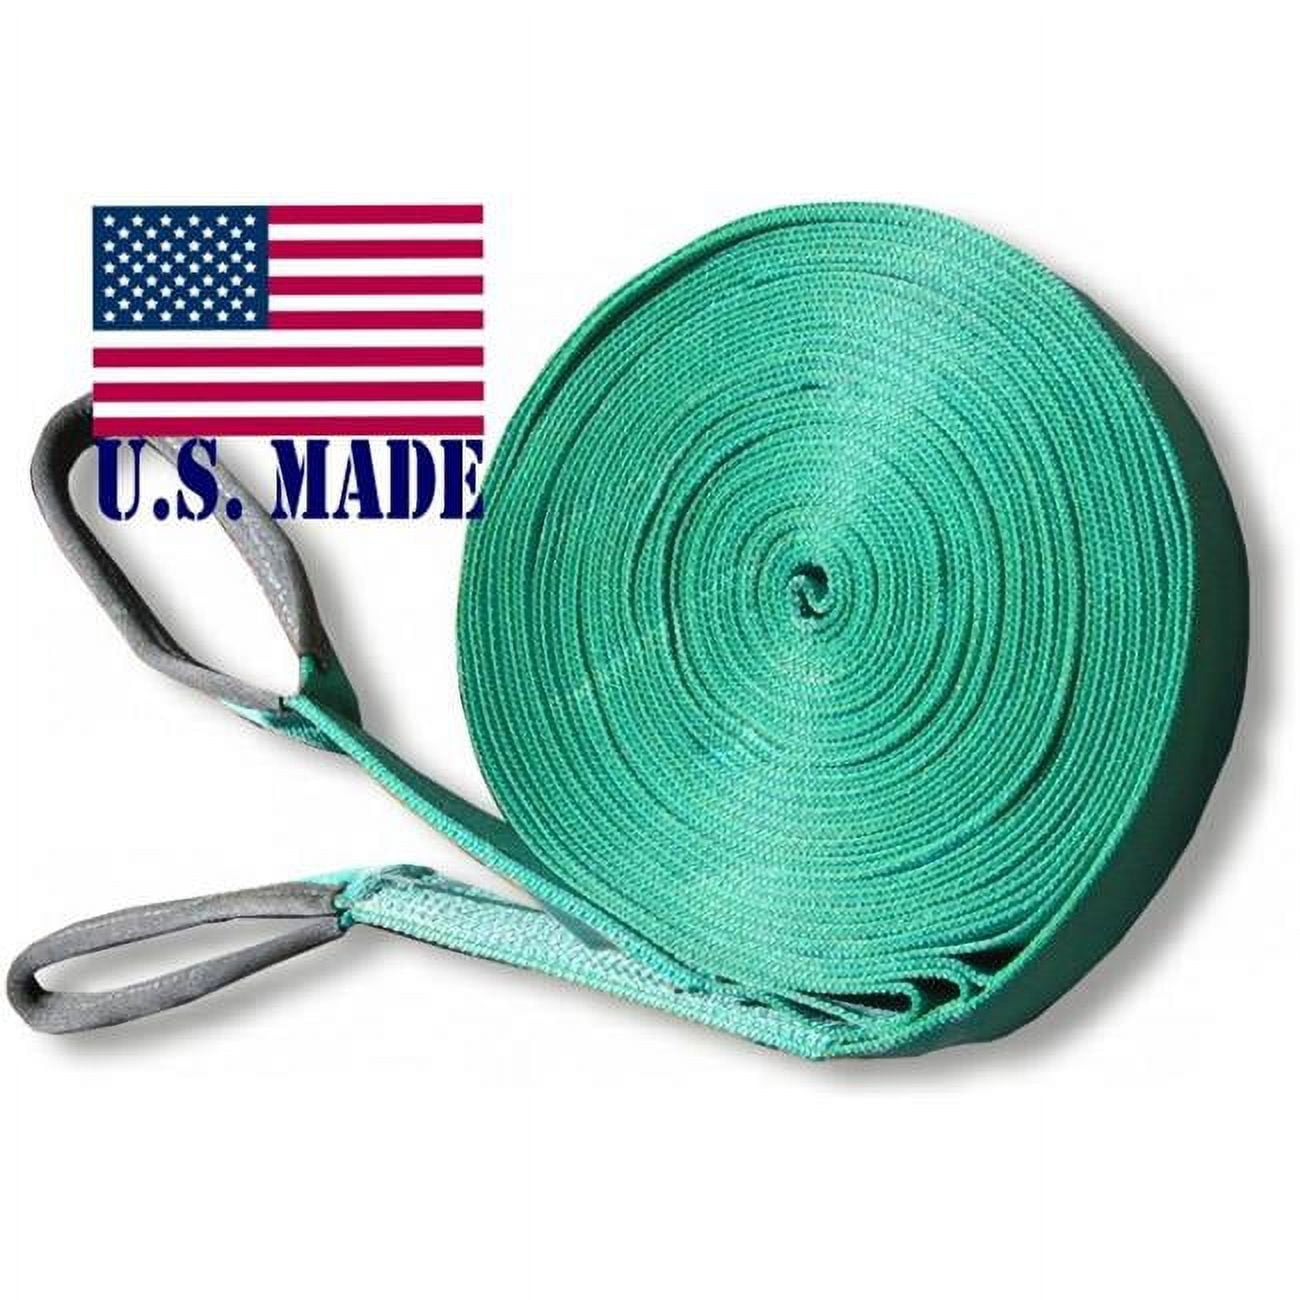 U.s. Made Hd Snatch Strap (3 Inch X 30 Ft) (off-road Recovery)